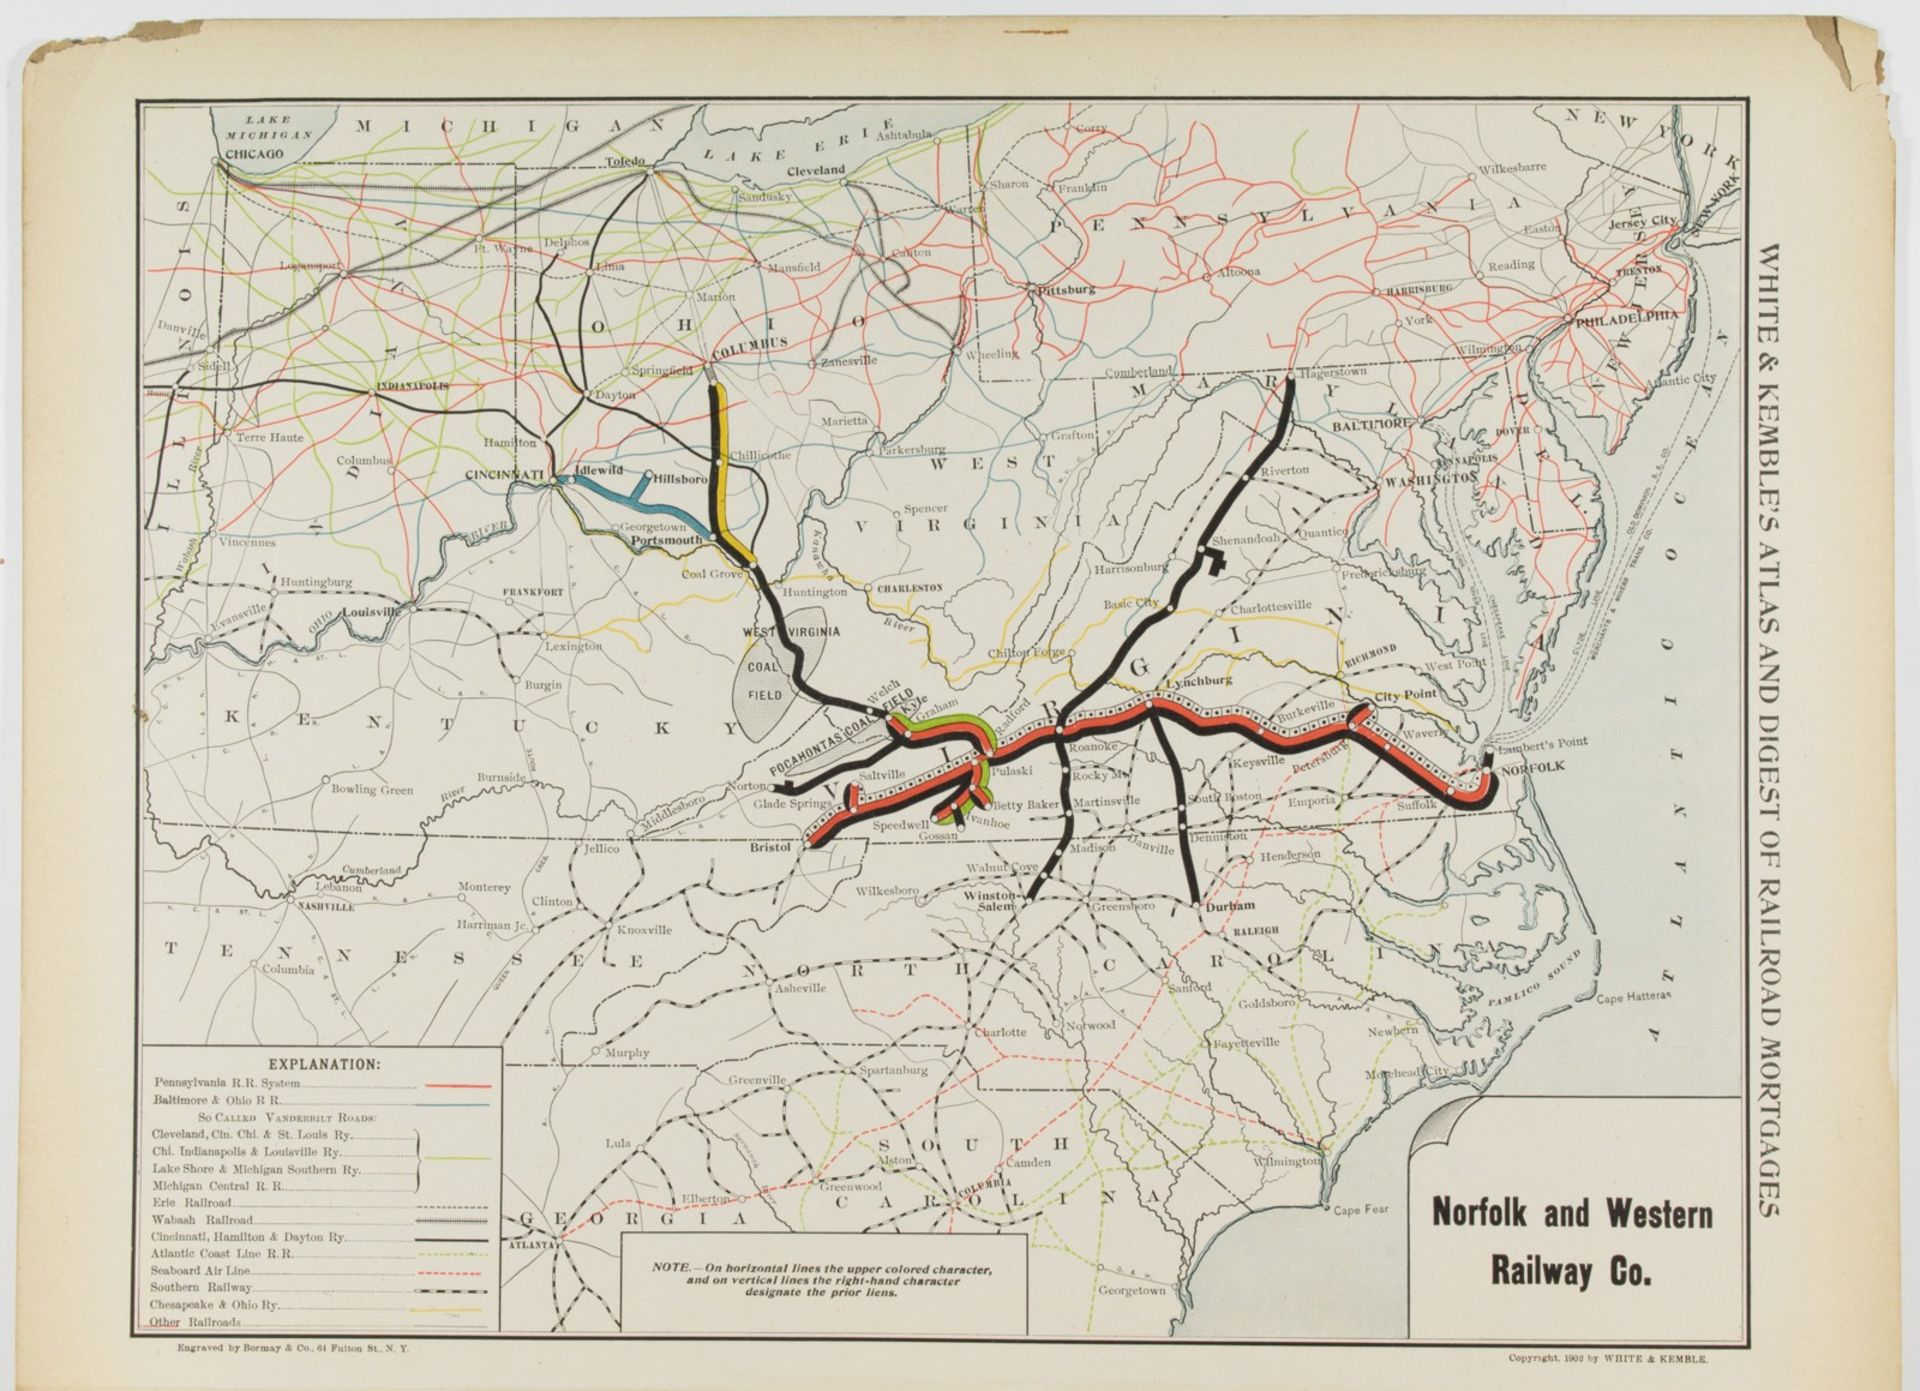 1902 NORFOLK AND WESTERN RAILROAD MAP